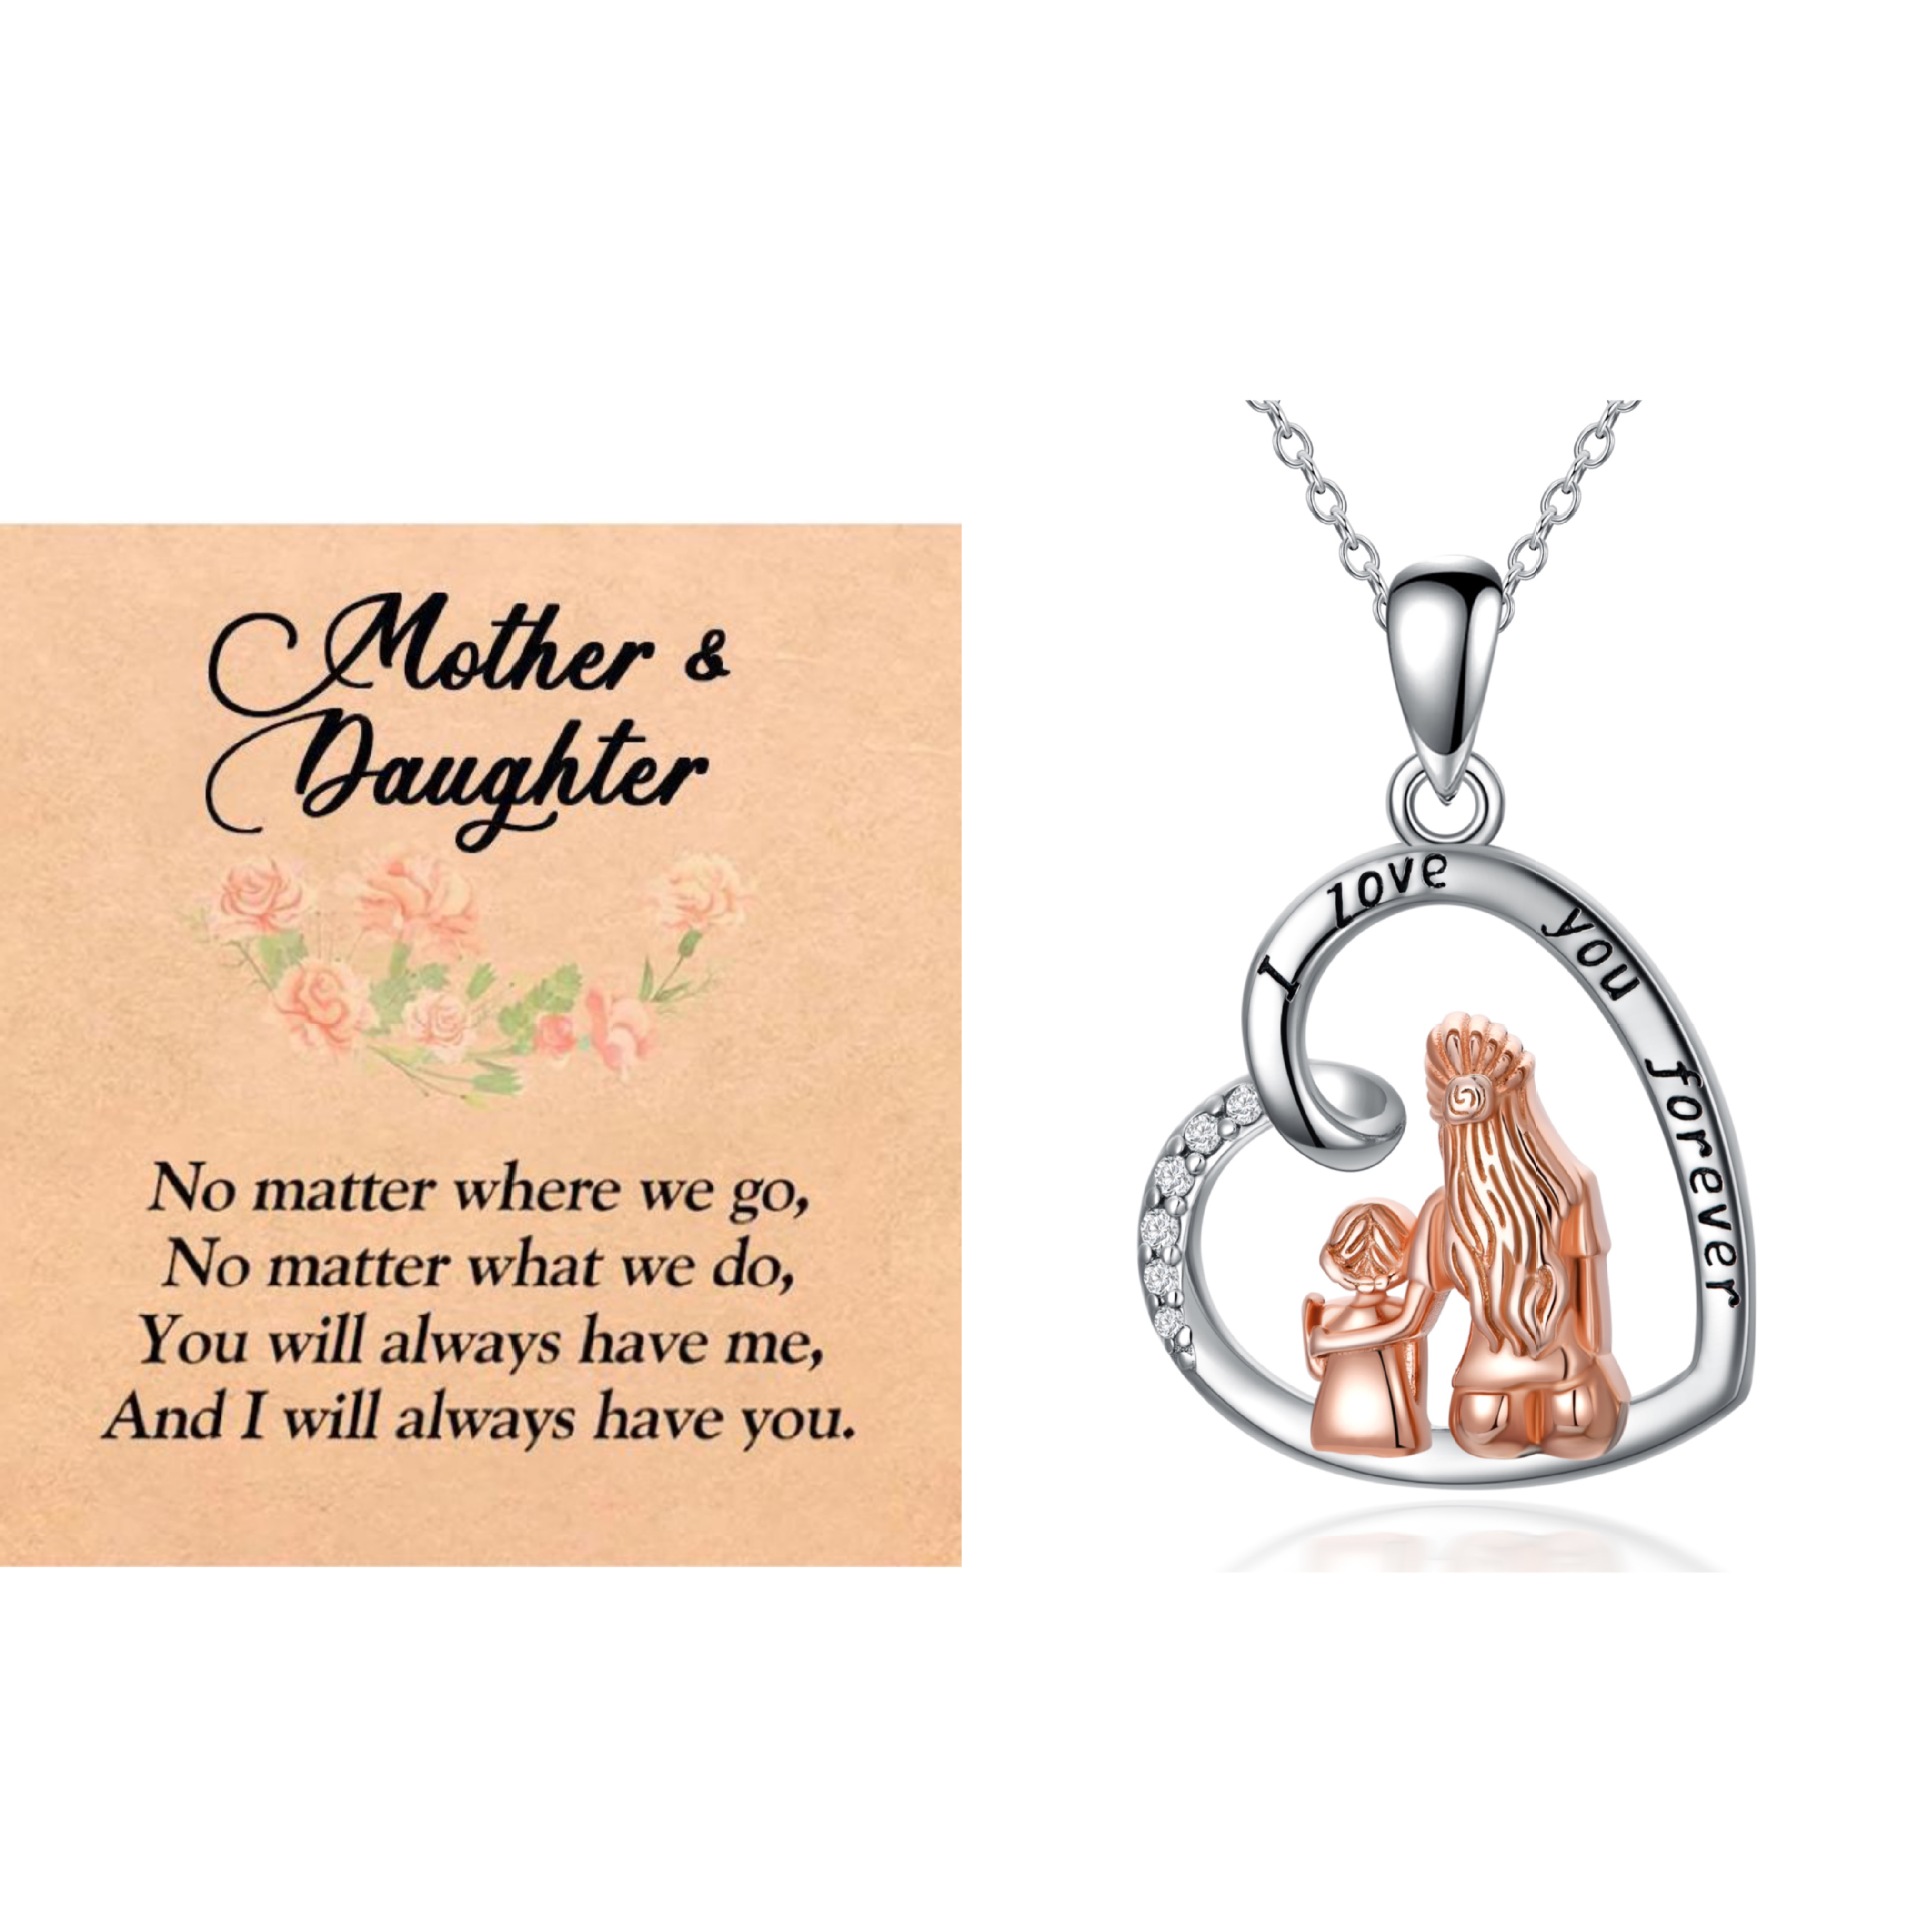 Necklace + mother and daughter card